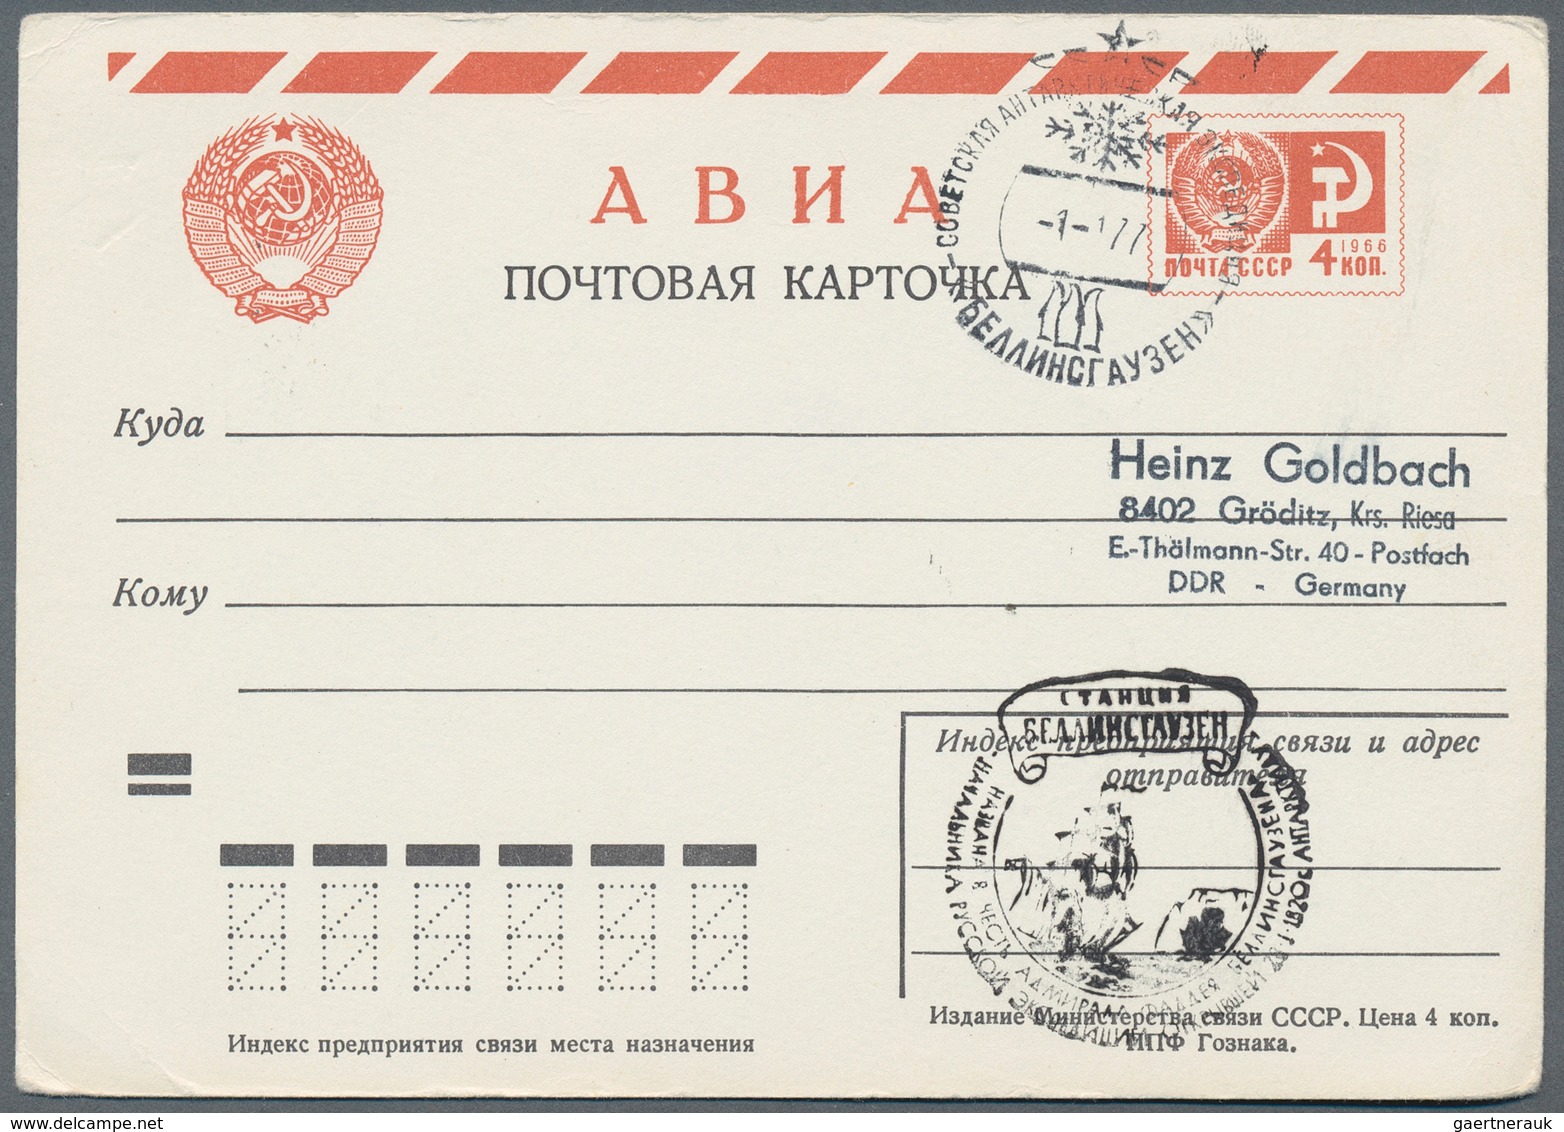 Sowjetunion - Ganzsachen: 1961/77, eleven unused and used airmail postal stationery cards of the 10t